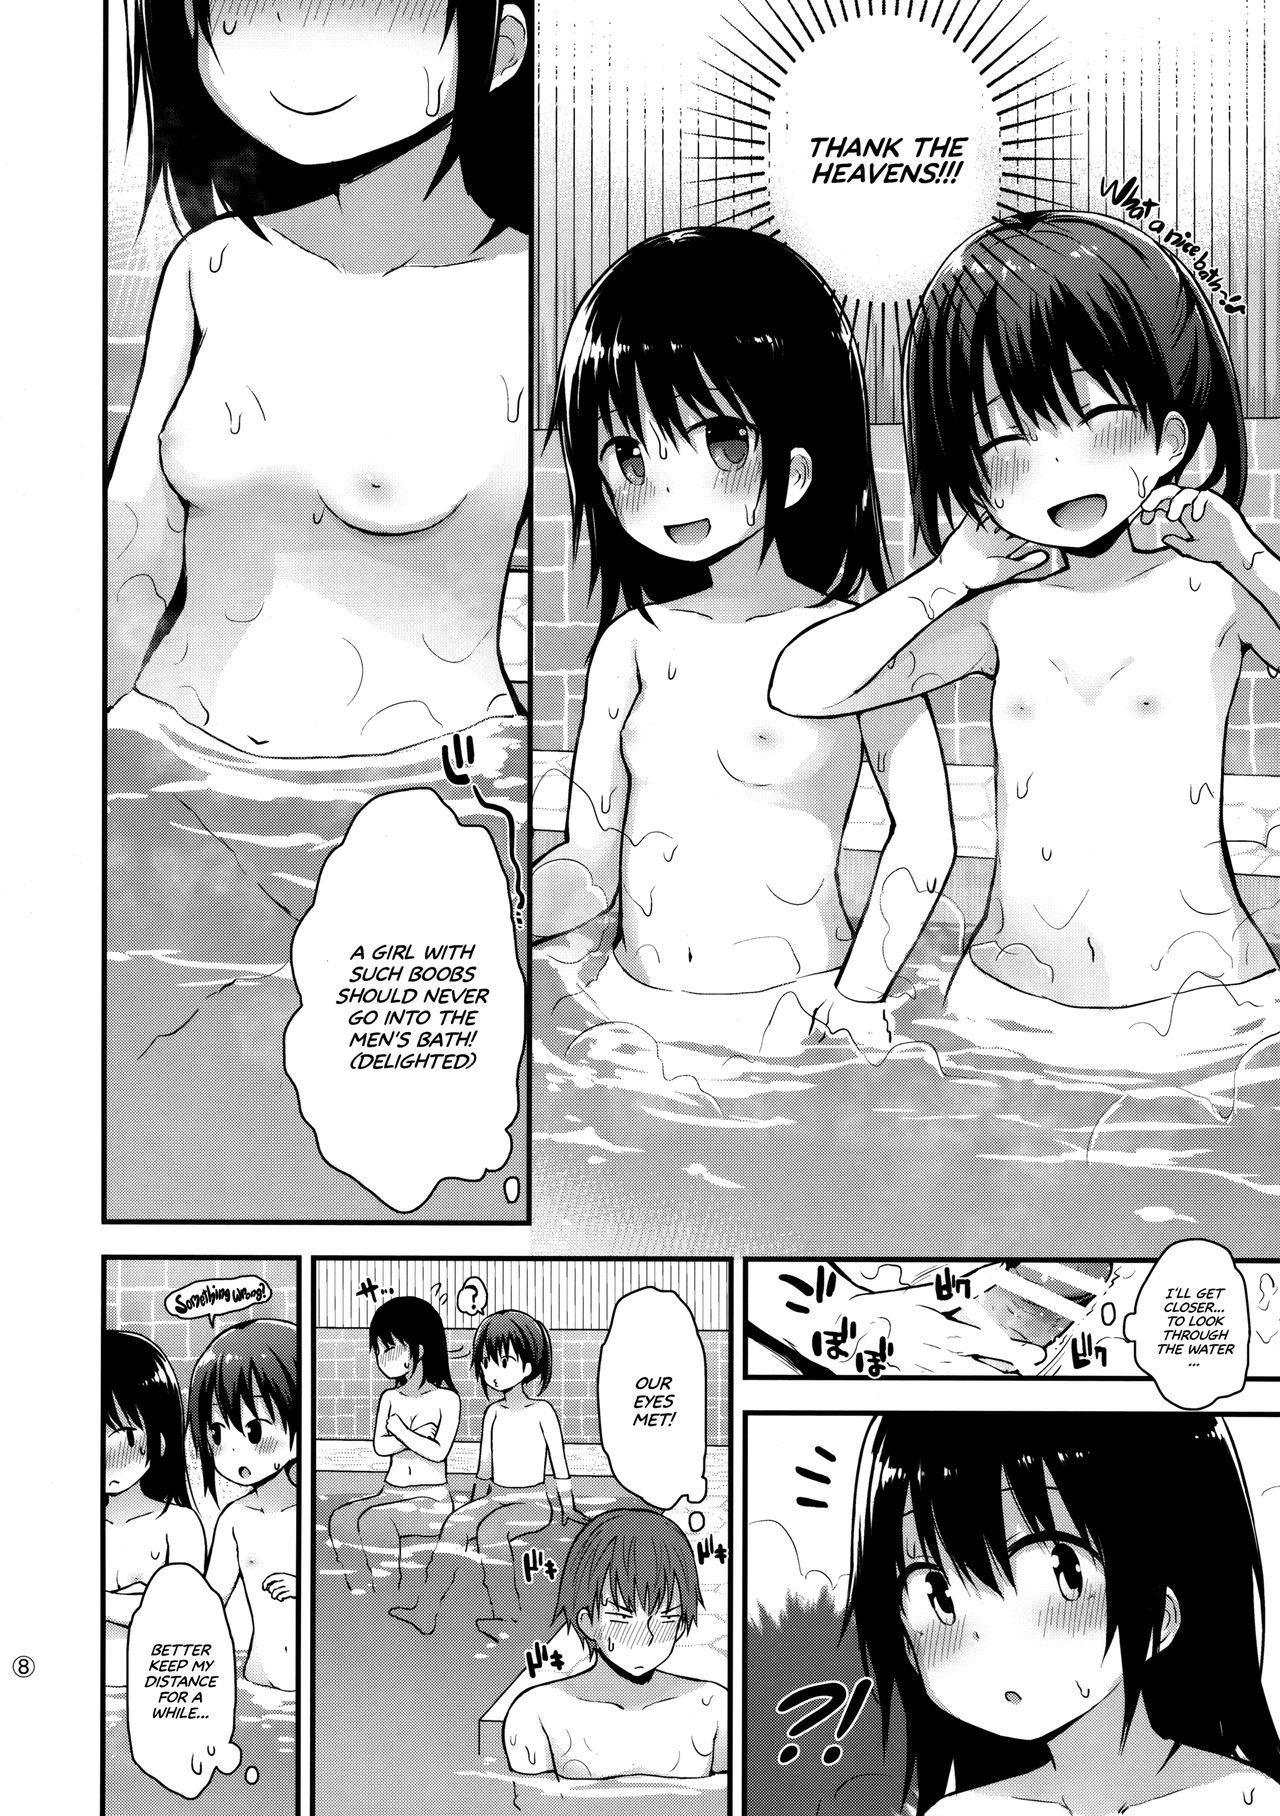 For Onnanoko datte Otokoyu ni Hairitai | They may just be little girls, but they still want to enter the men's bath! - Original Fuck My Pussy Hard - Page 7